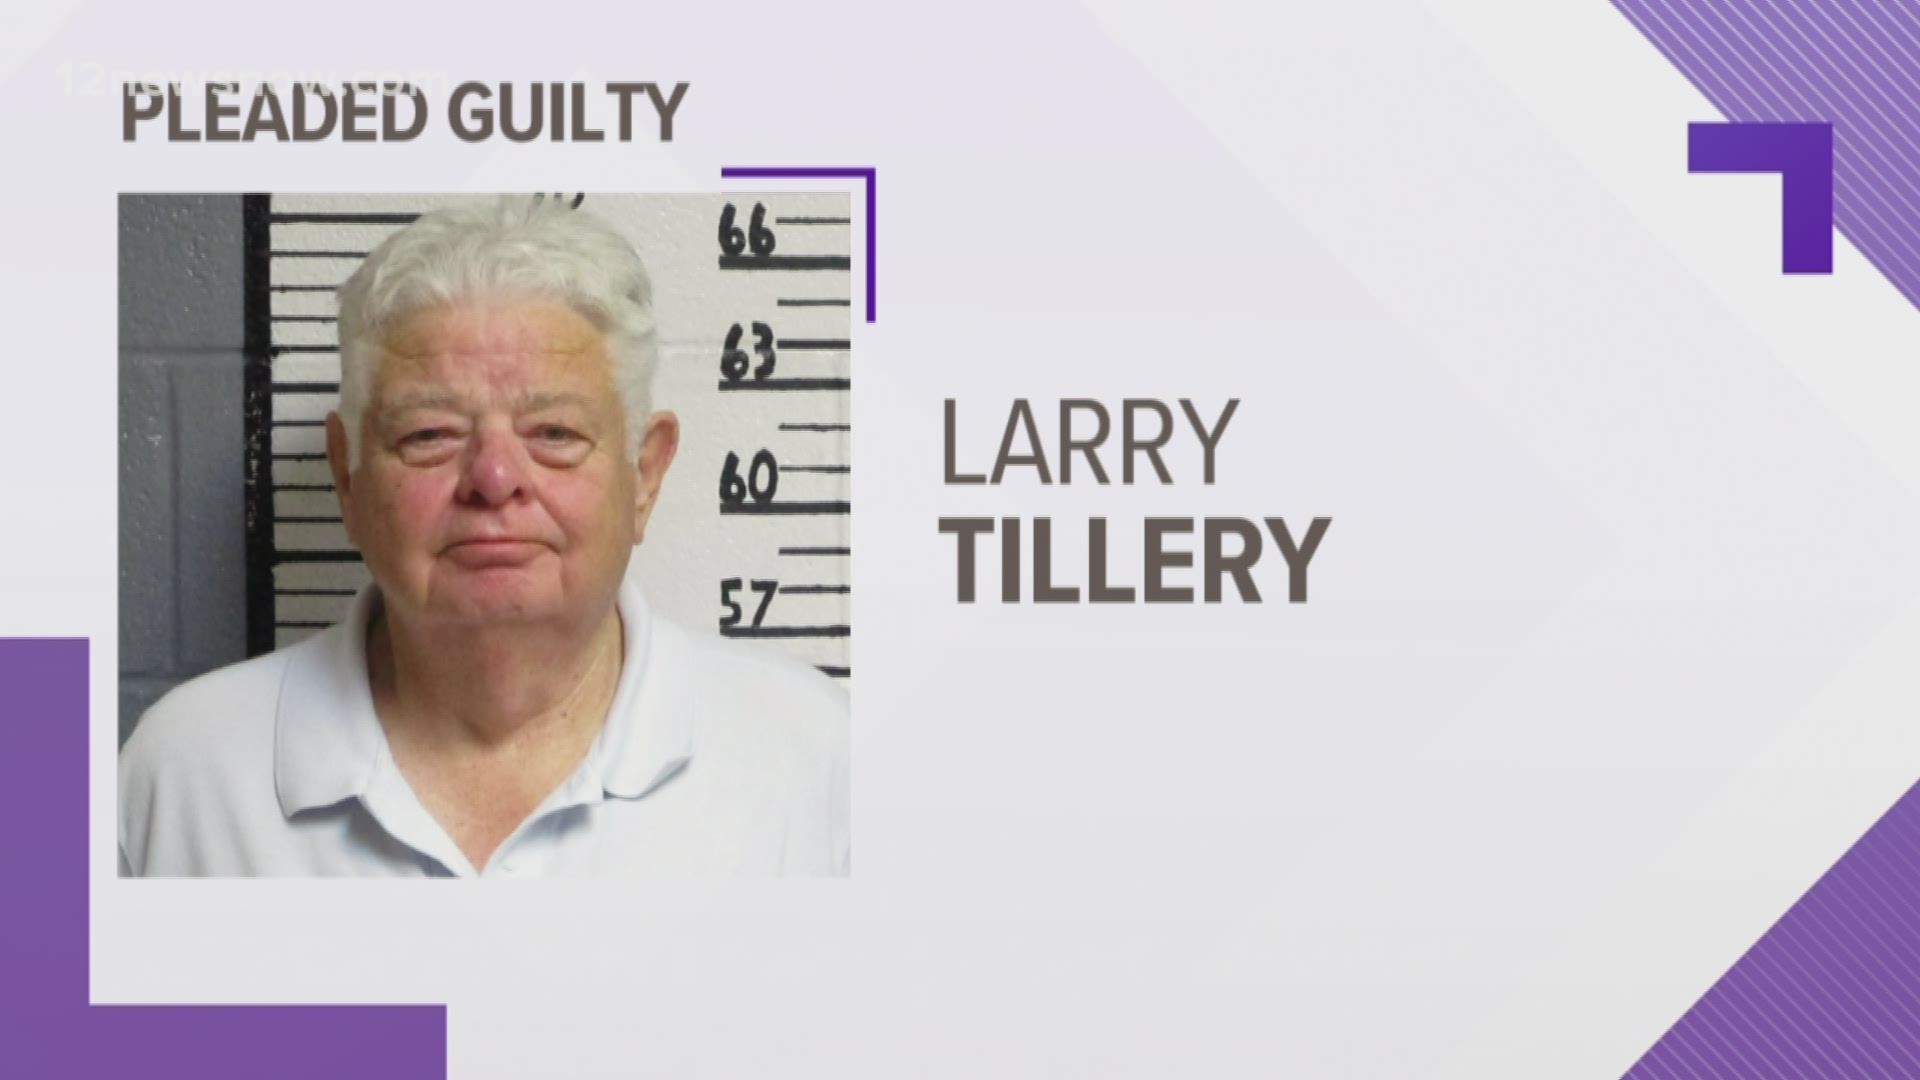 Tillery, his wife and son all pleaded guilty on Tuesday.